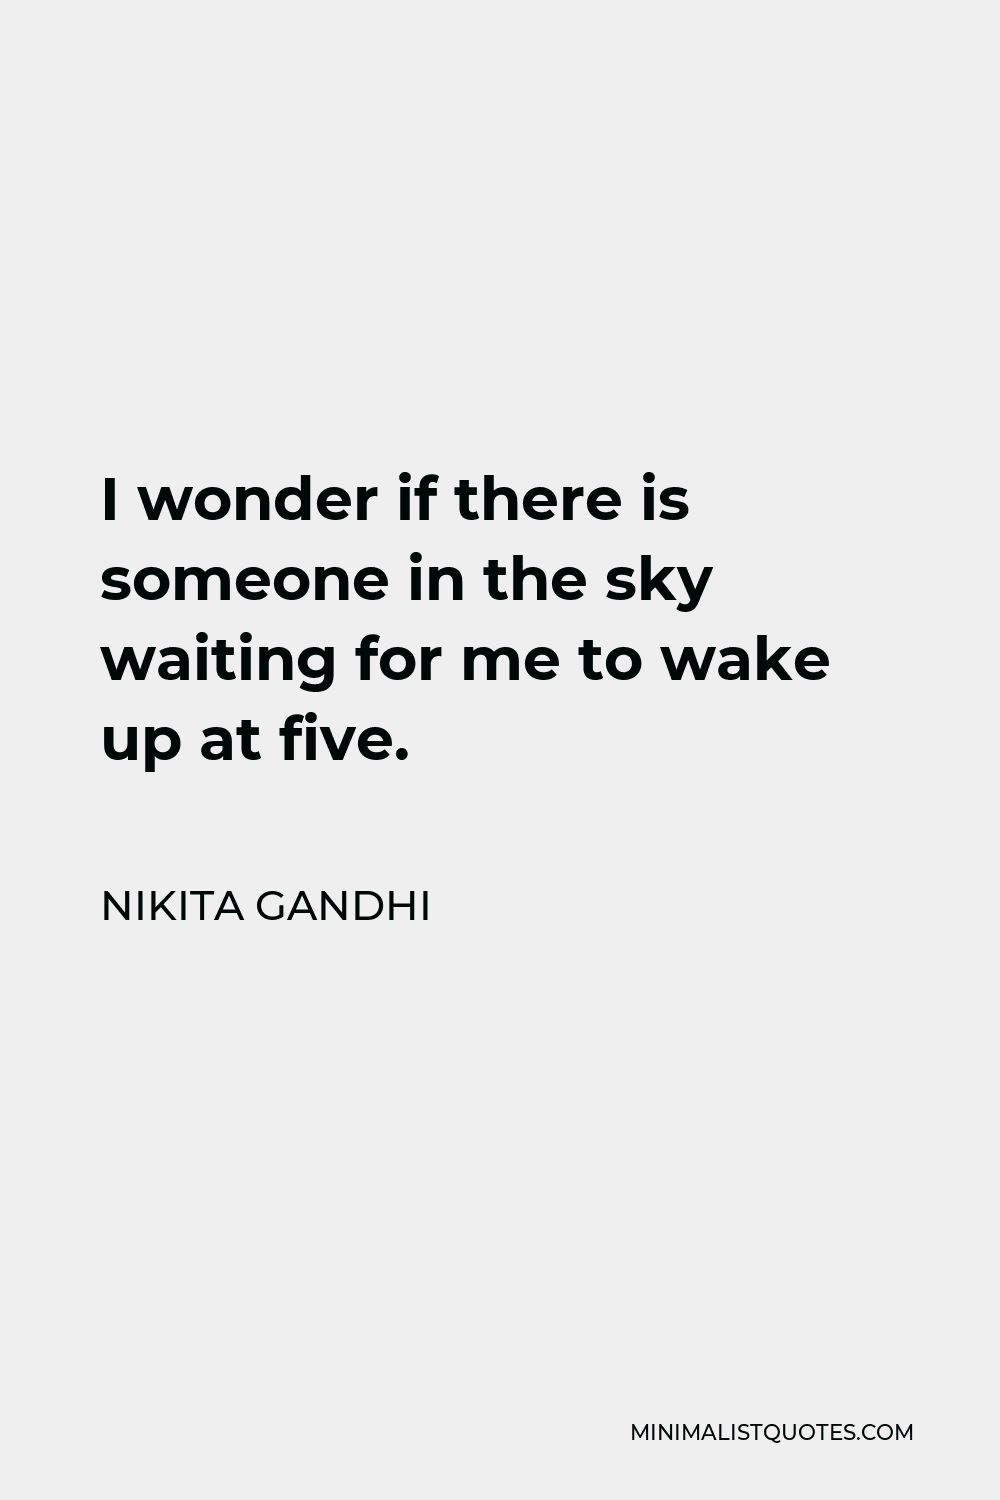 Nikita Gandhi Quote - I wonder if there is someone in the sky waiting for me to wake up at five.